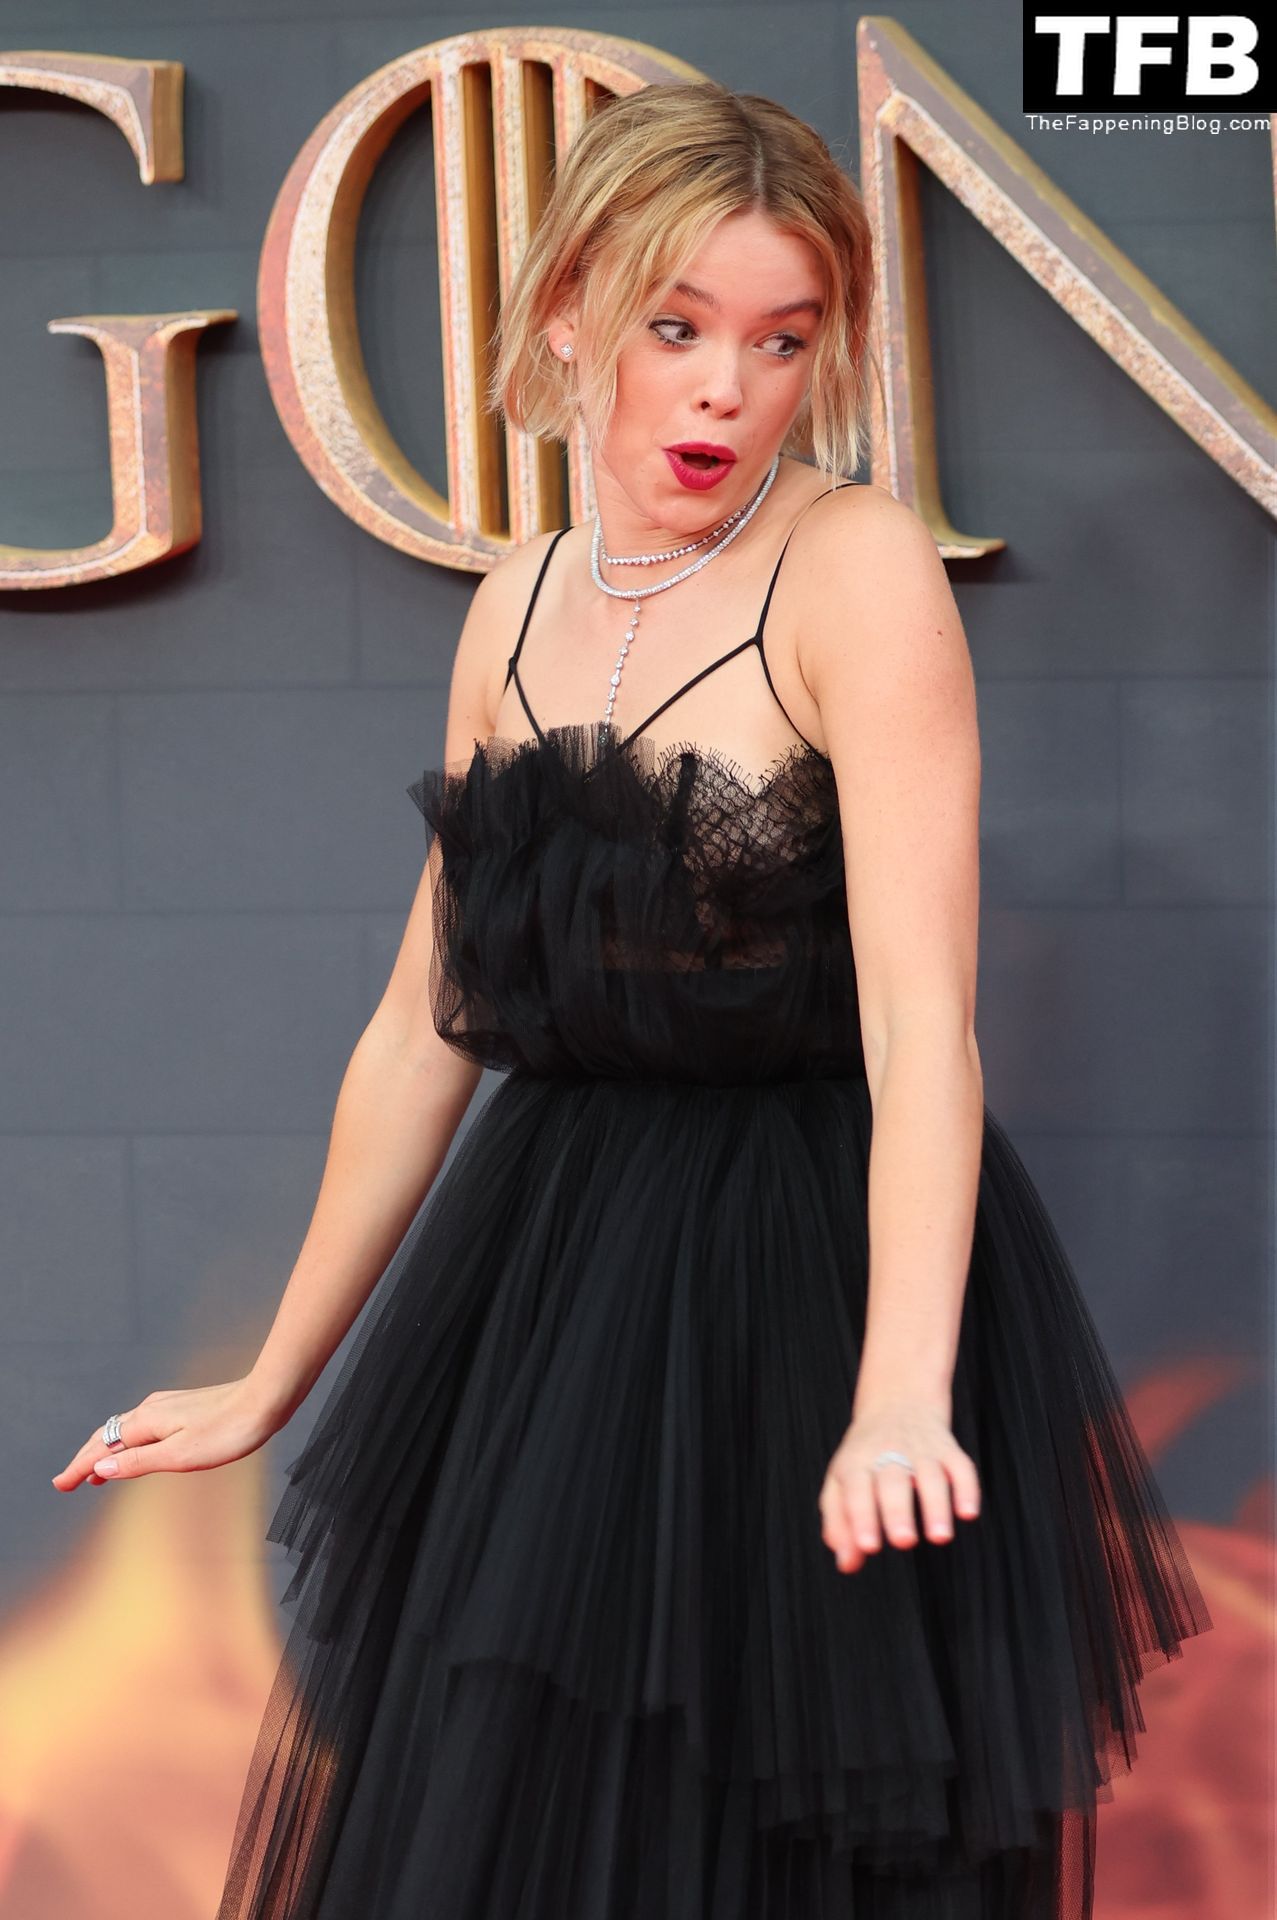 Milly Alcock Poses in a Black Dress at the HBO’s “House of the Dragon” Premiere in London (23 Photos)